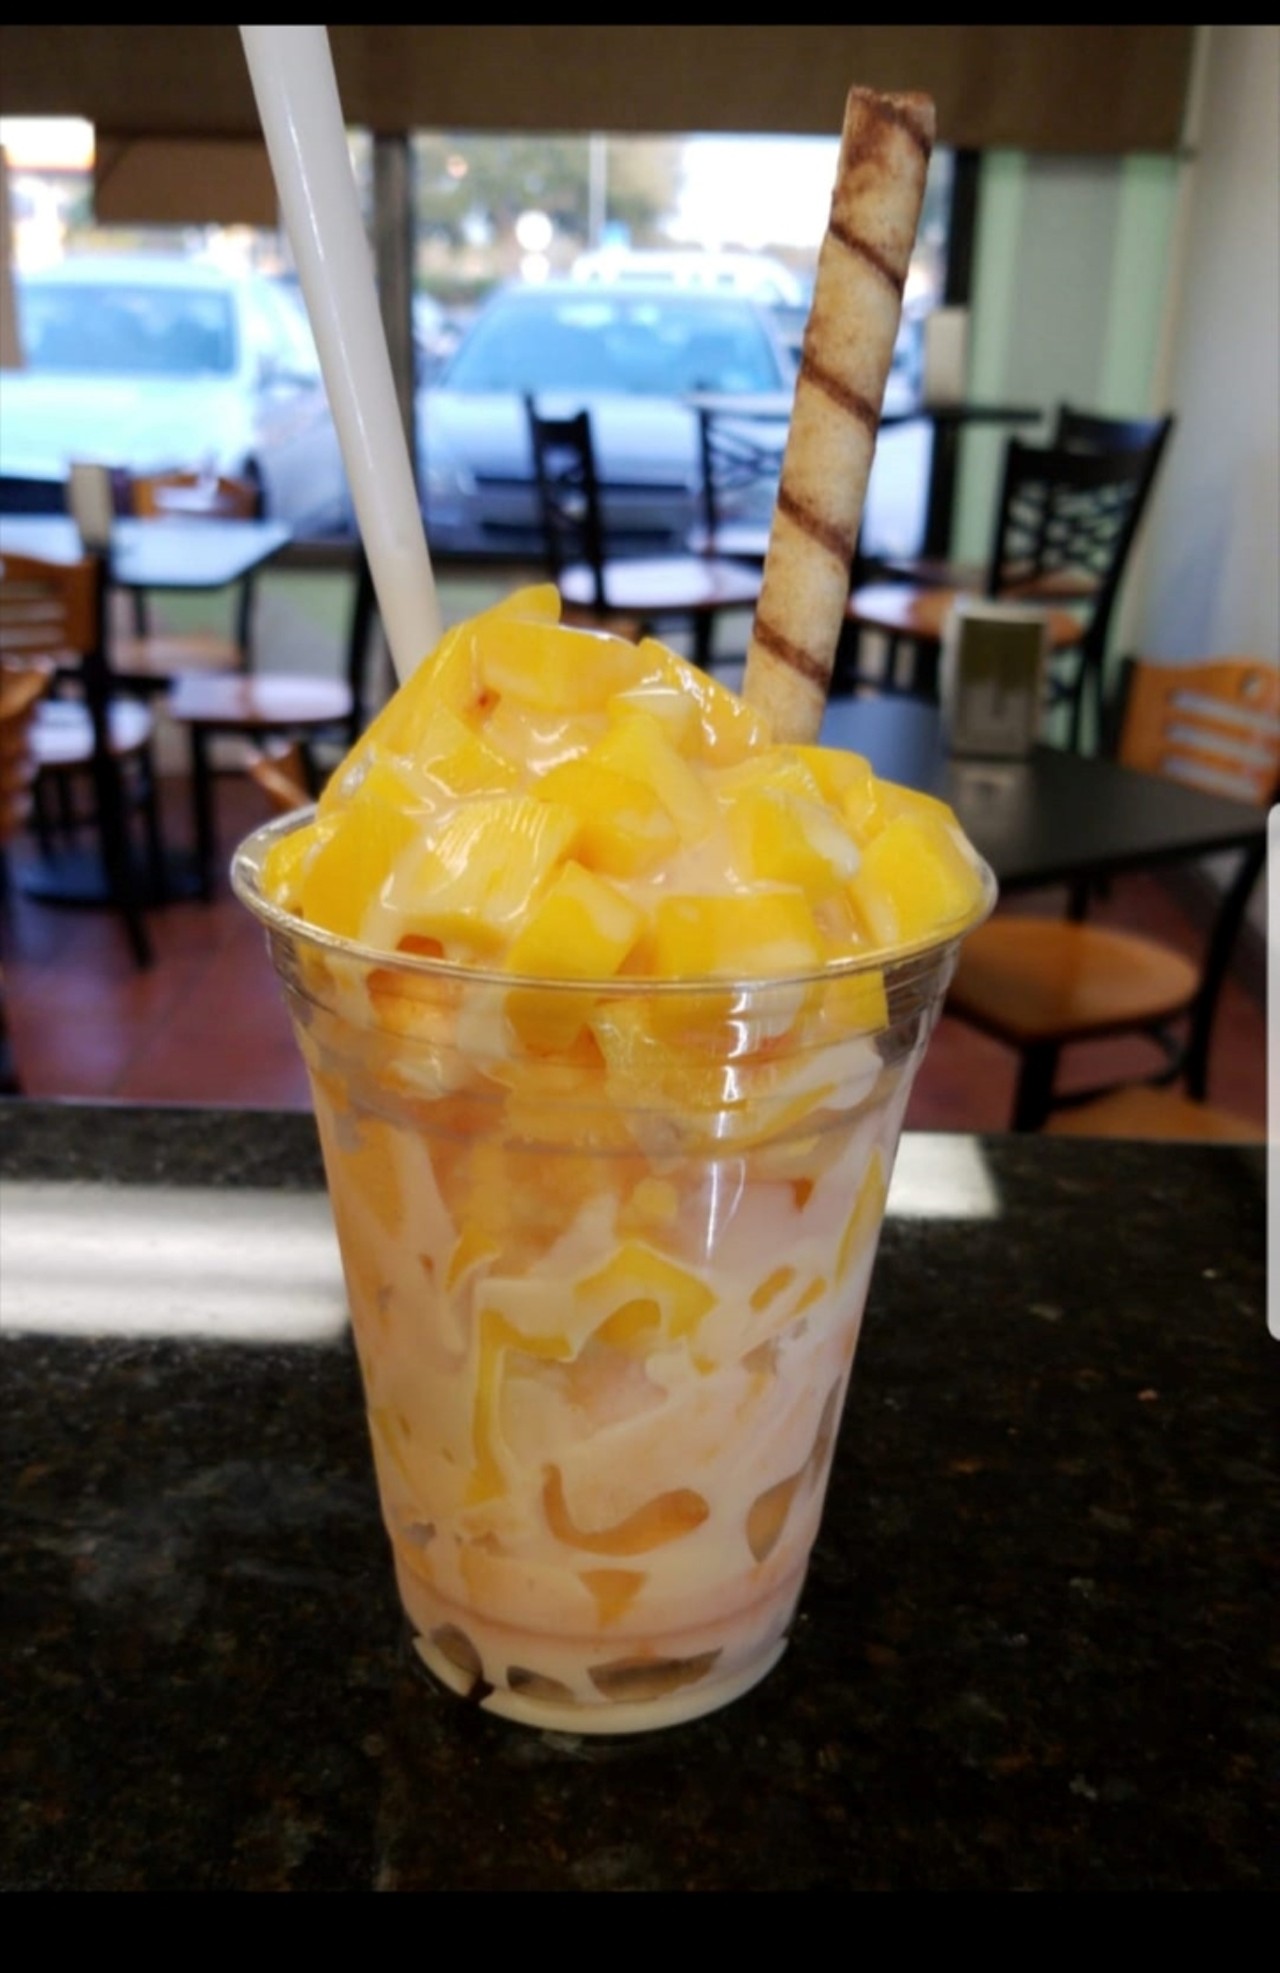 Gustitos Helados y Raspados 
1718 N. Goldenrod Road
The goodies at Gustitos are a sweet way to treat yourself to healthy desserts. Be sure to check out their signature mangonadas for a special treat!
Photo via Gustitos/Facebook